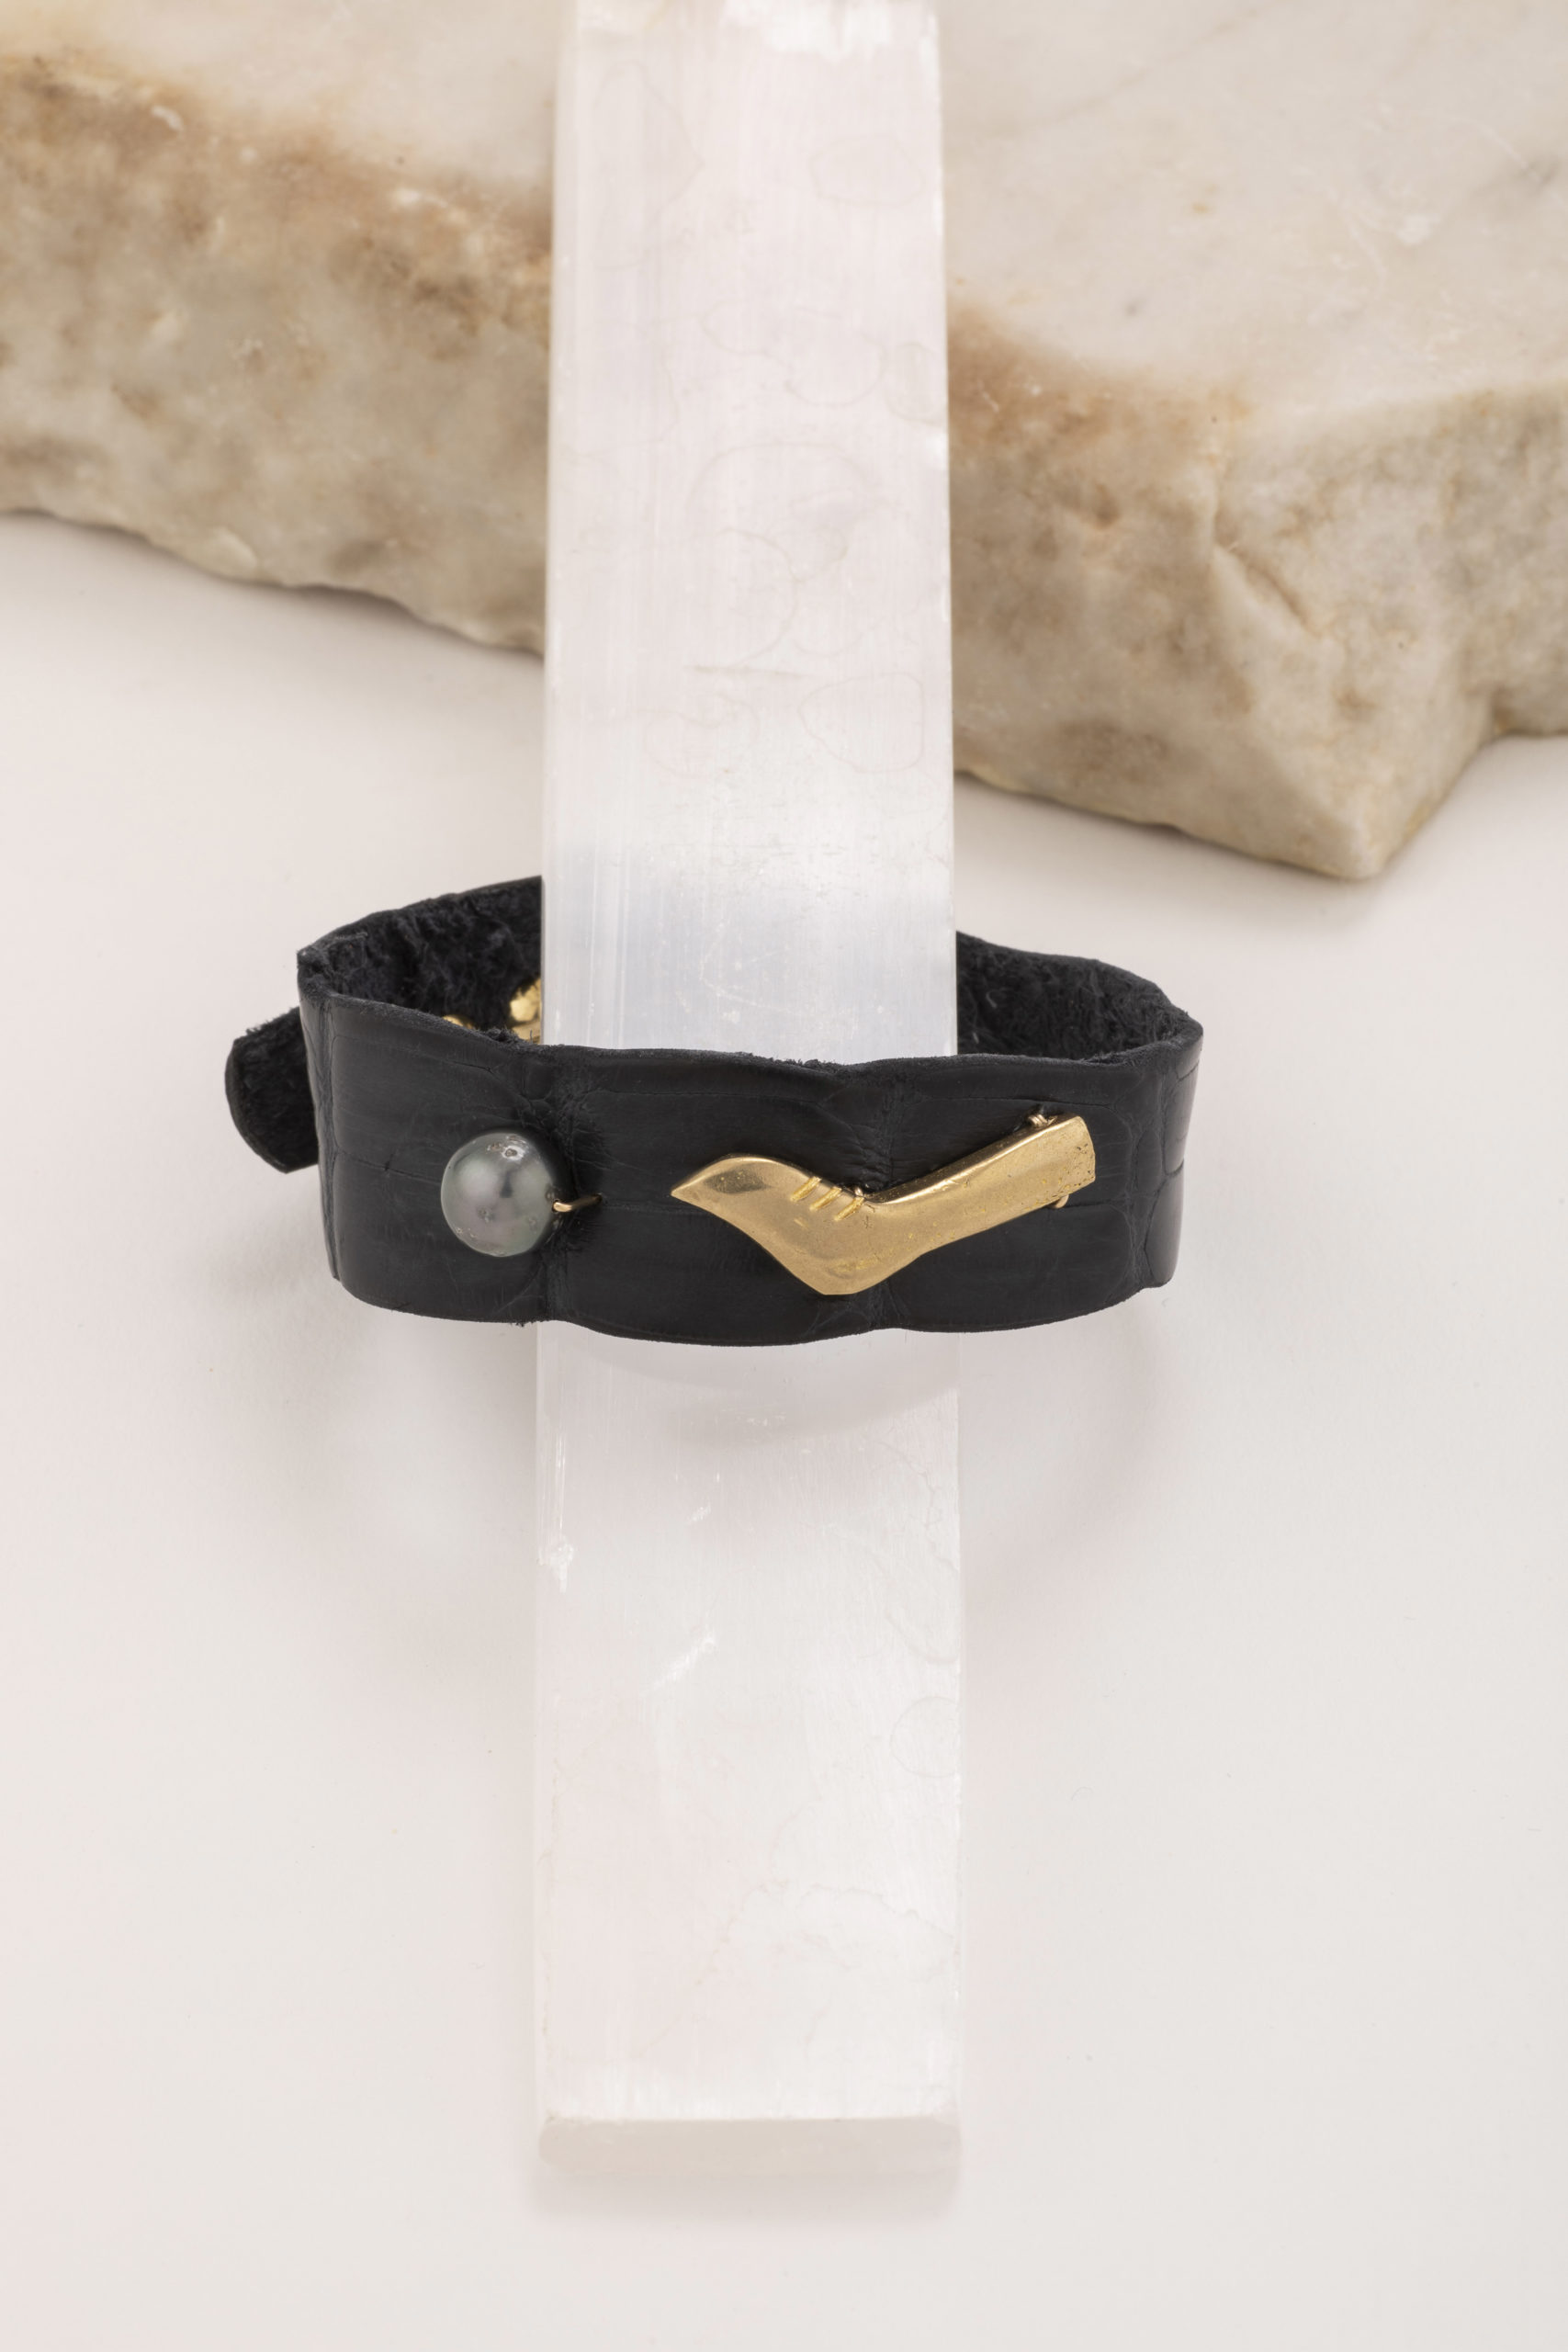 Featured image for “Robin Leather Bracelet”